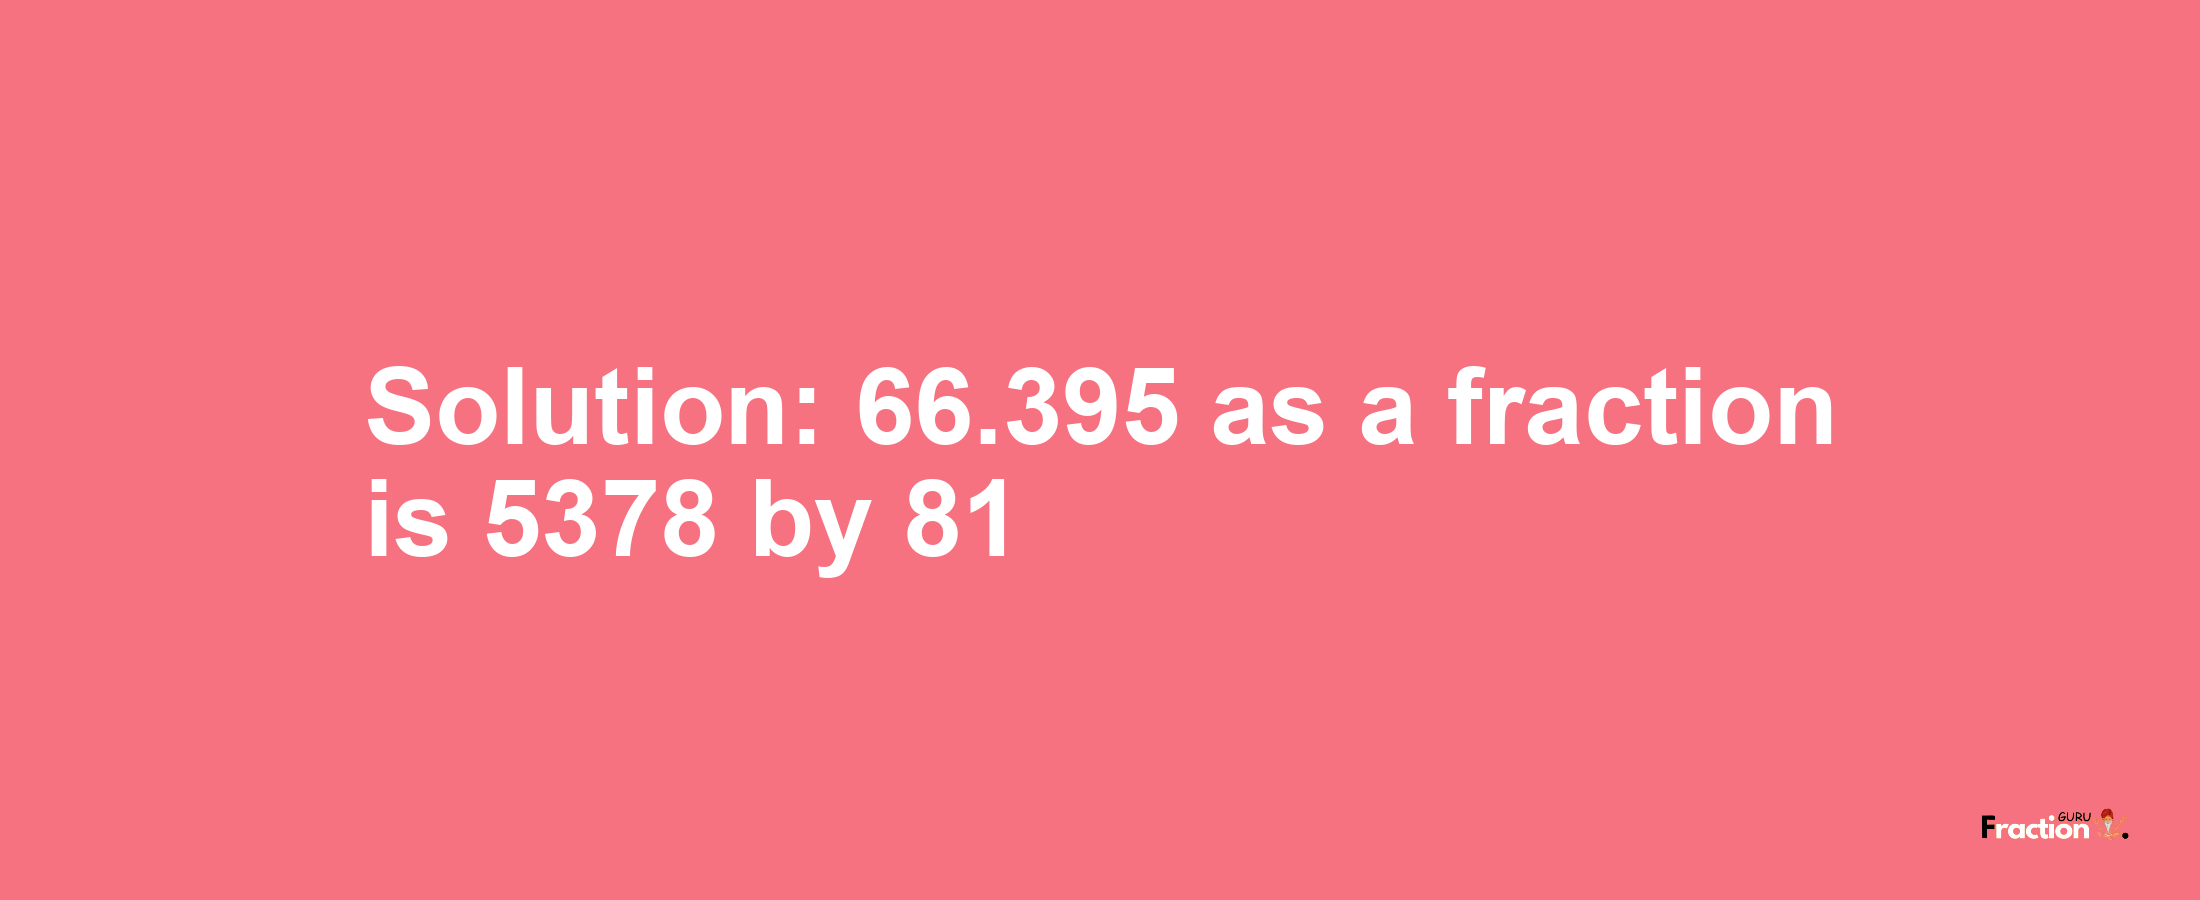 Solution:66.395 as a fraction is 5378/81